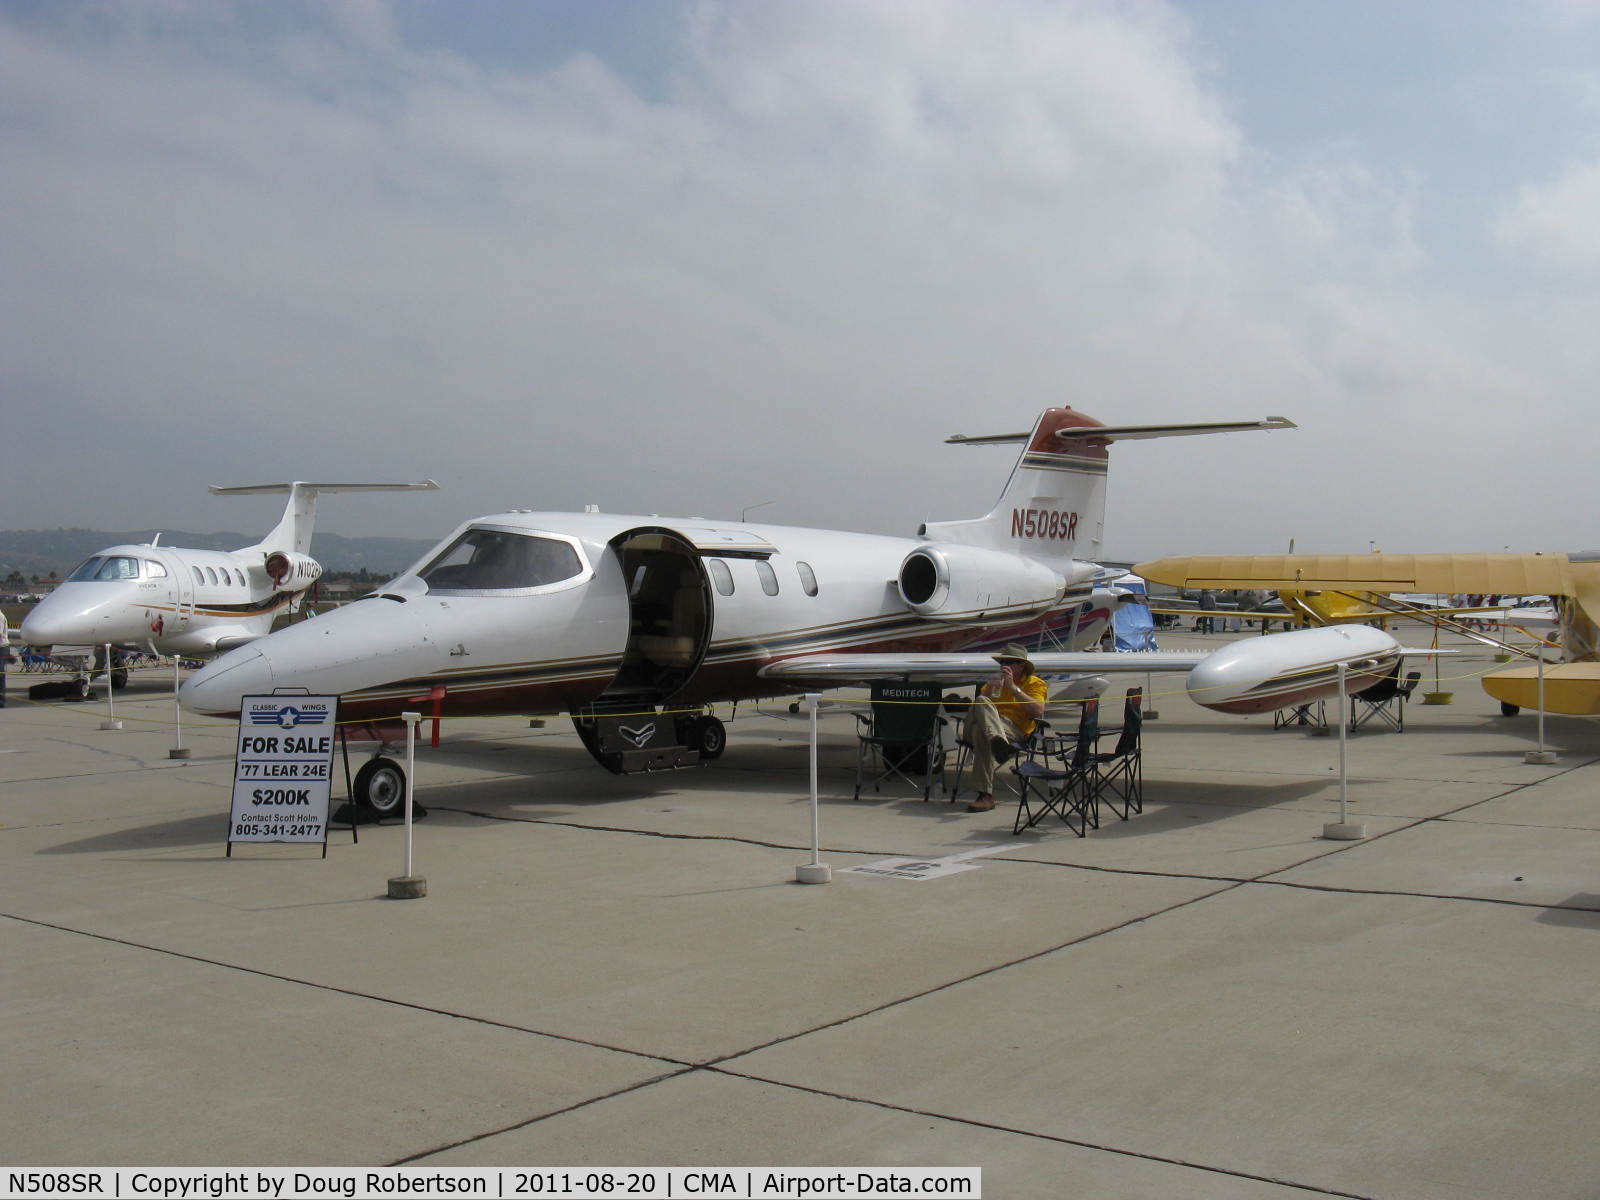 N508SR, 1977 Gates Learjet 24E C/N 347, 1977 GATES LEAR JET 24E, two General Electric CJ610-8A Turbojets 2,950 lb st each, Century III wing, Ceiling 51,000 ft (a record for FAA certification in class at the time). FOR SALE